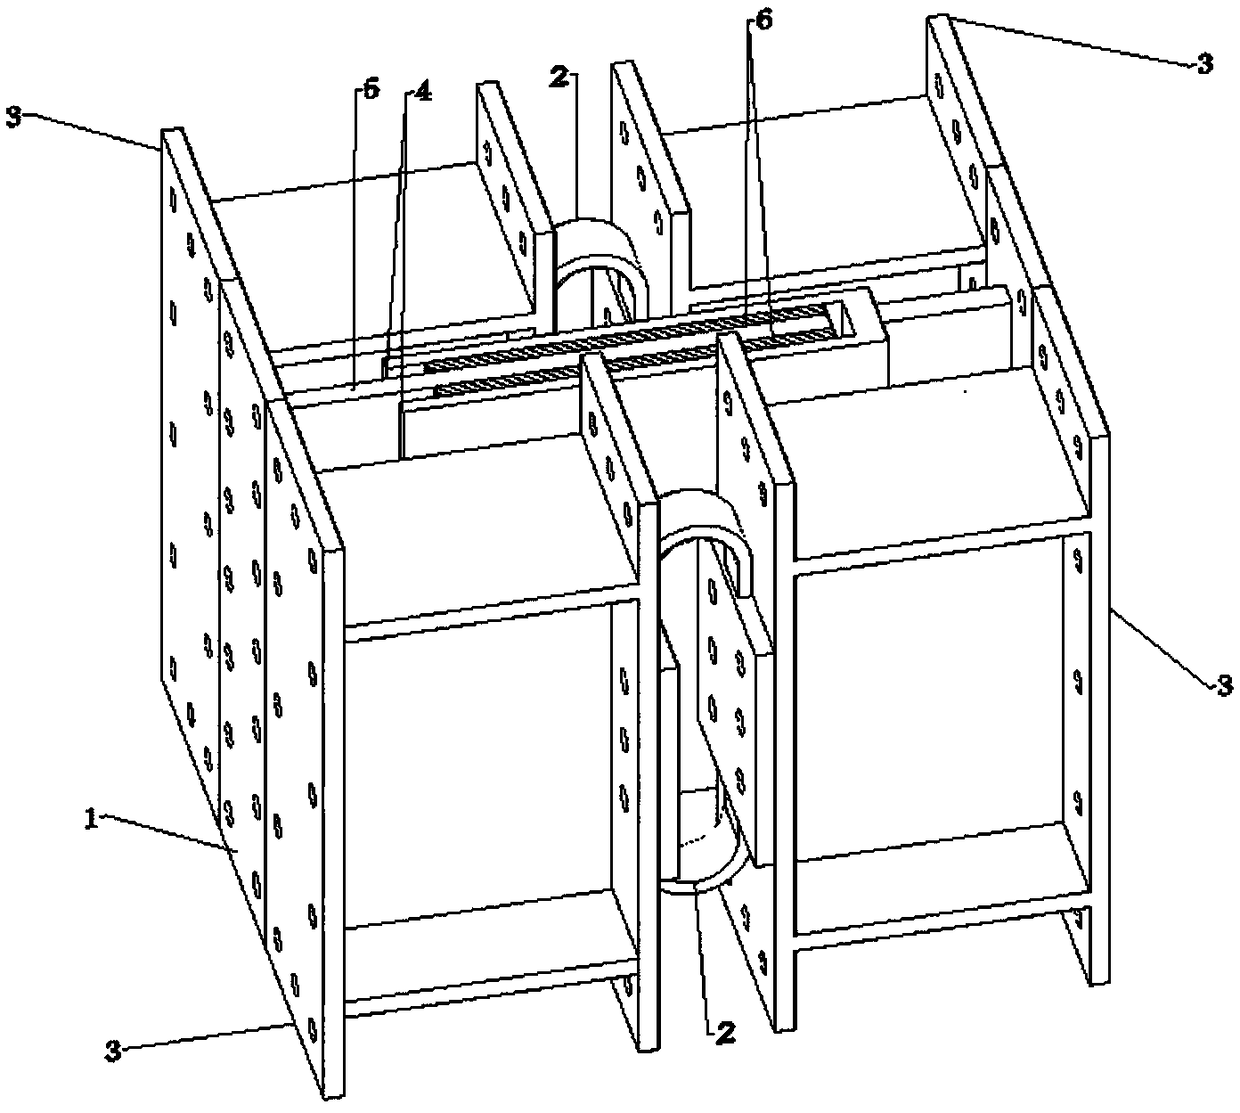 A Combined Wind and Earthquake Resistant Beam Energy Dissipator